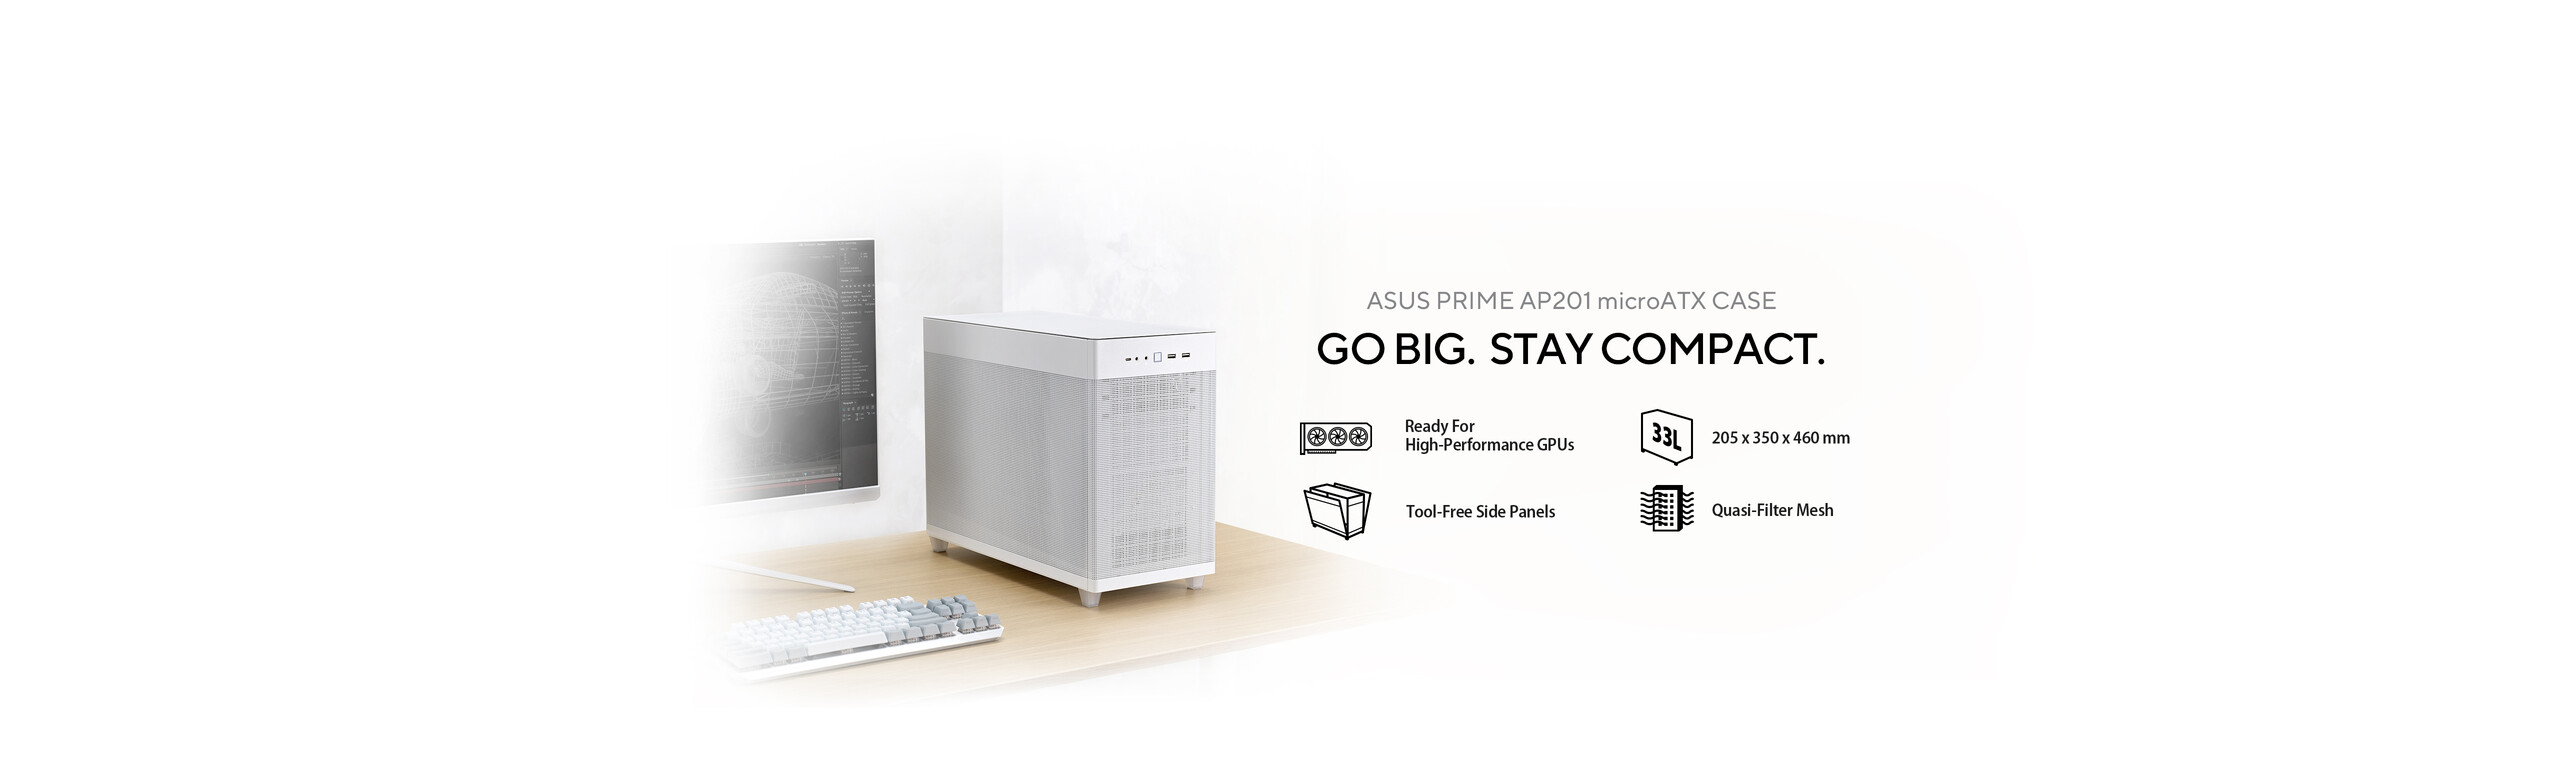 ASUS Prime AP201 microATX Case features ready for high-performance GPUs, 33L volume, tool-free side panels, and quasi-filter mesh